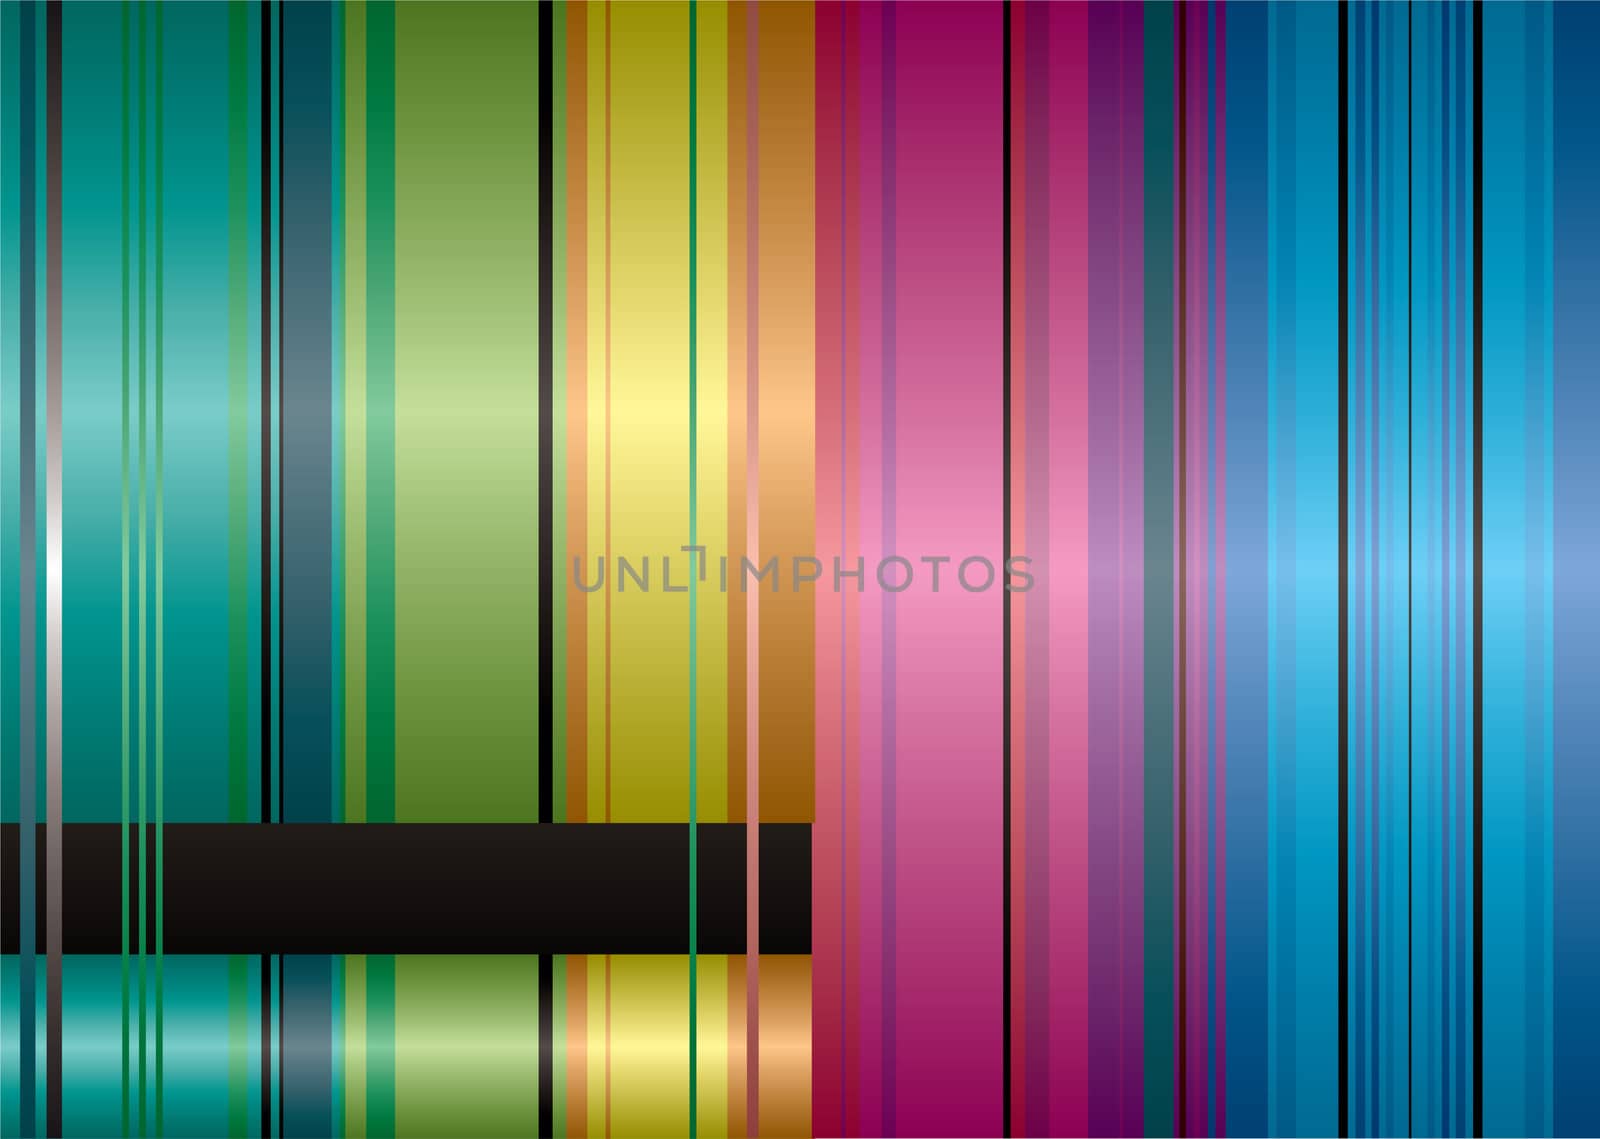 Brightly coloured ribbon inspired abstract striped background with copyspace